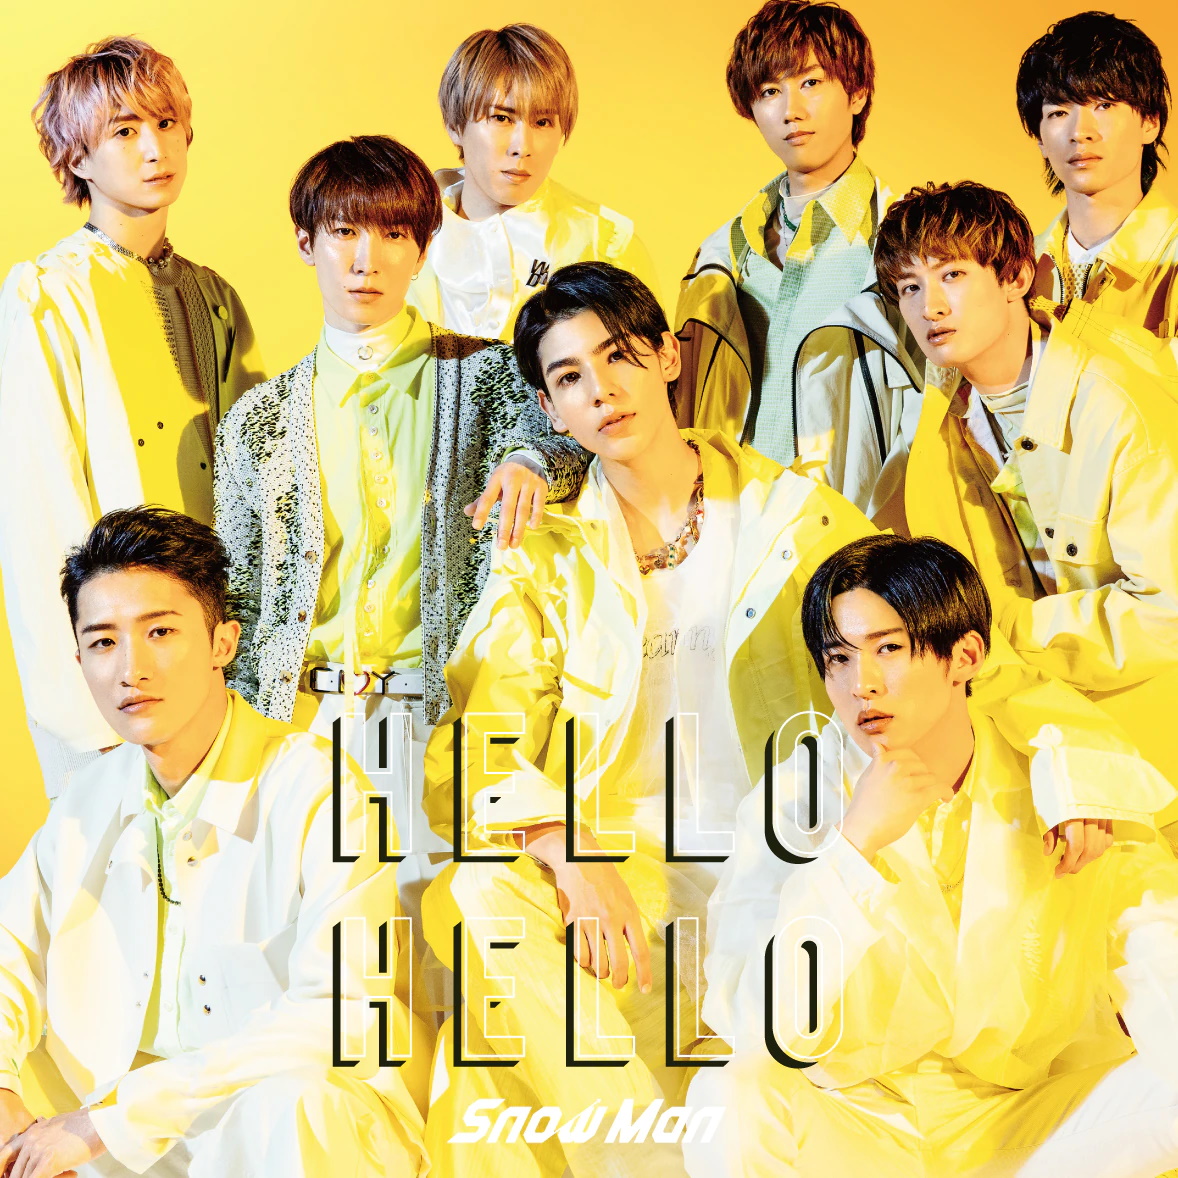 Cover for『Snow Man - Hip bounce!!』from the release『HELLO HELLO』